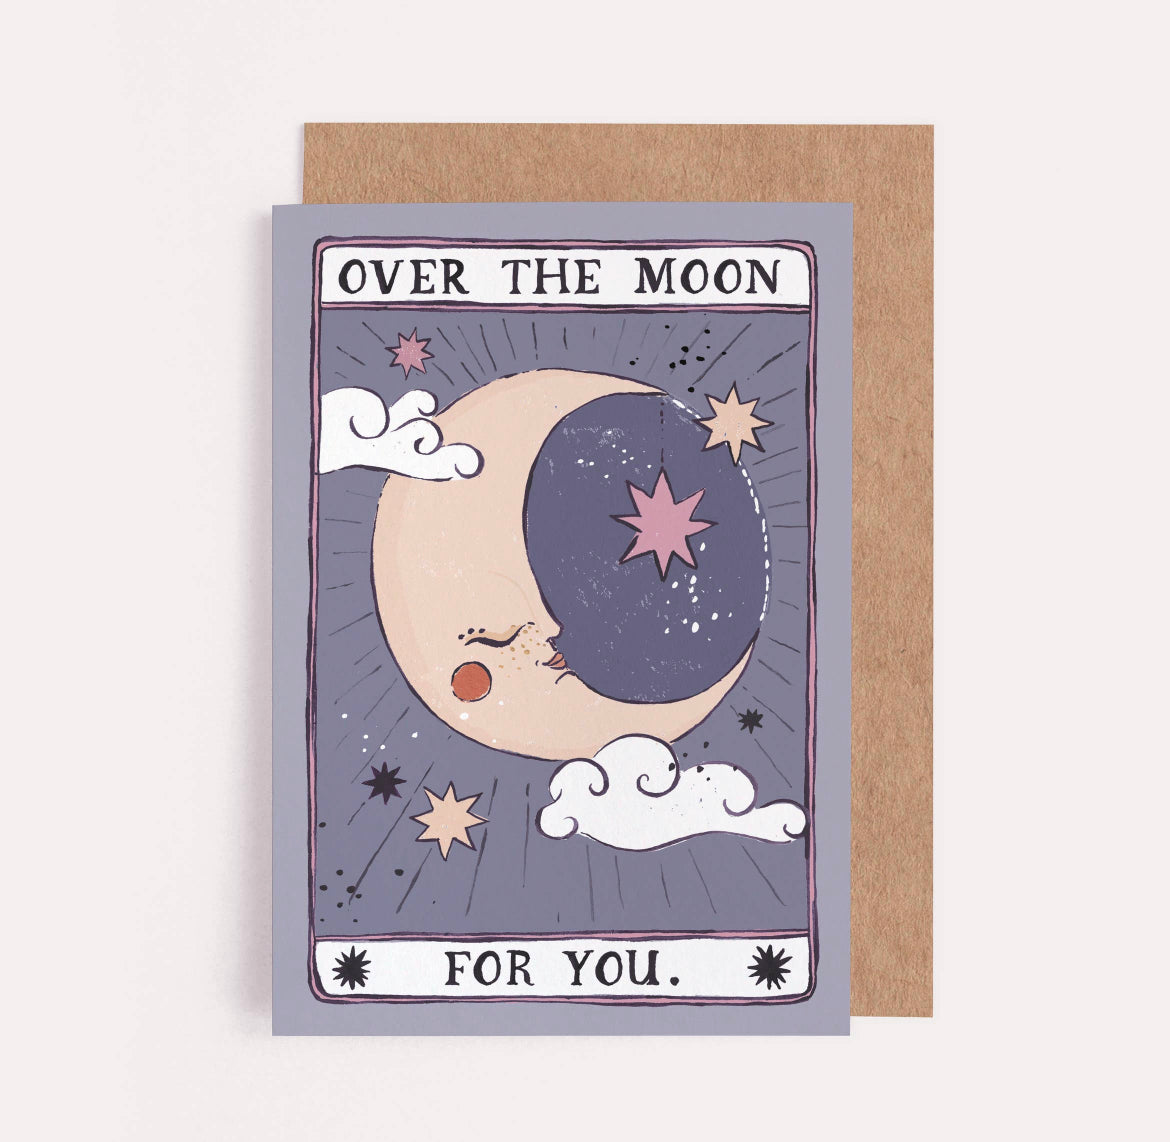 Over the moon card